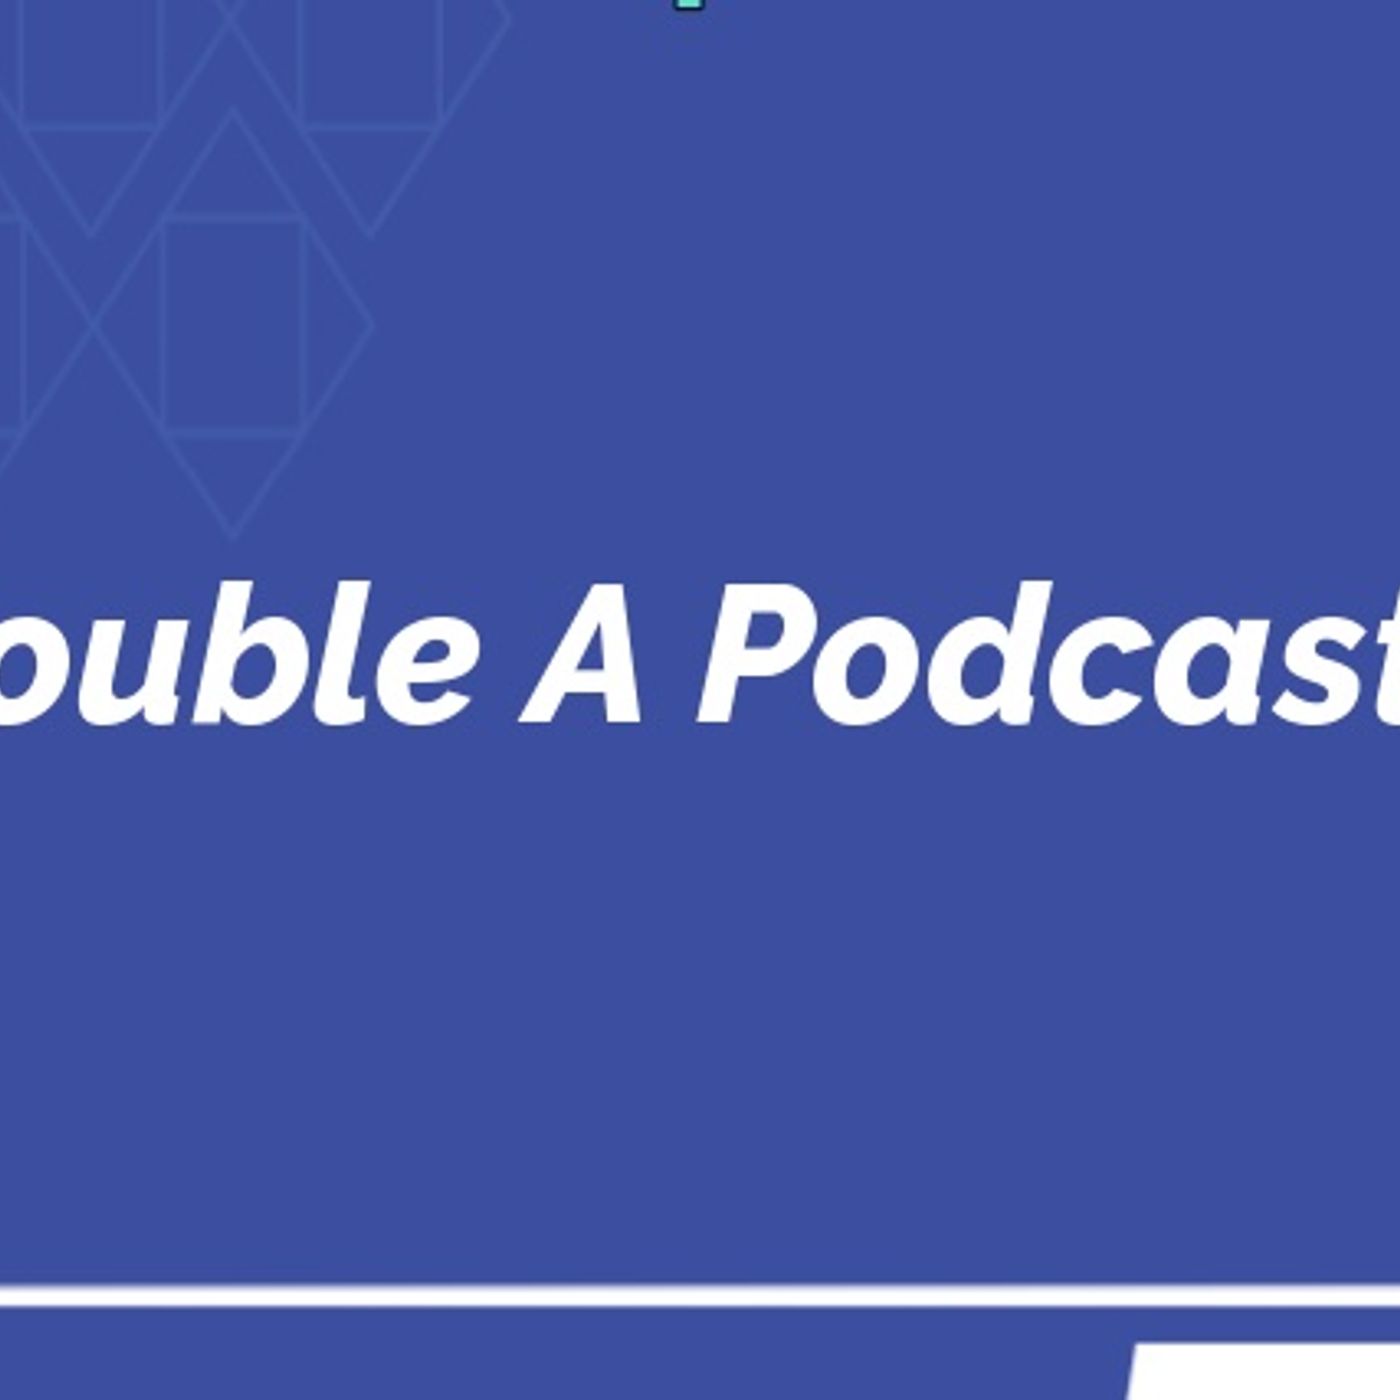 Double A Podcasts